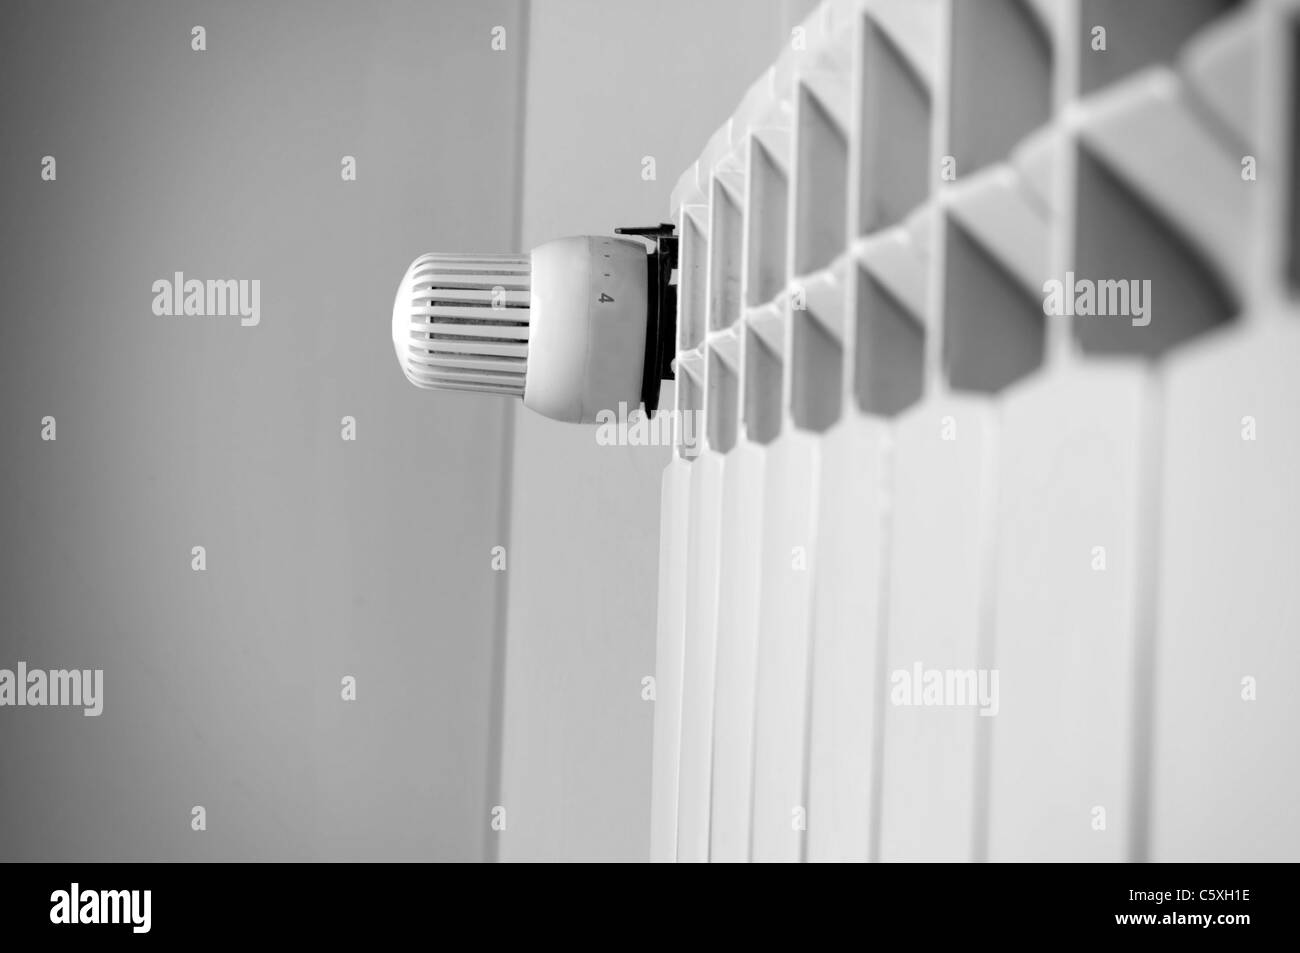 Close-up to an home radiator Stock Photo